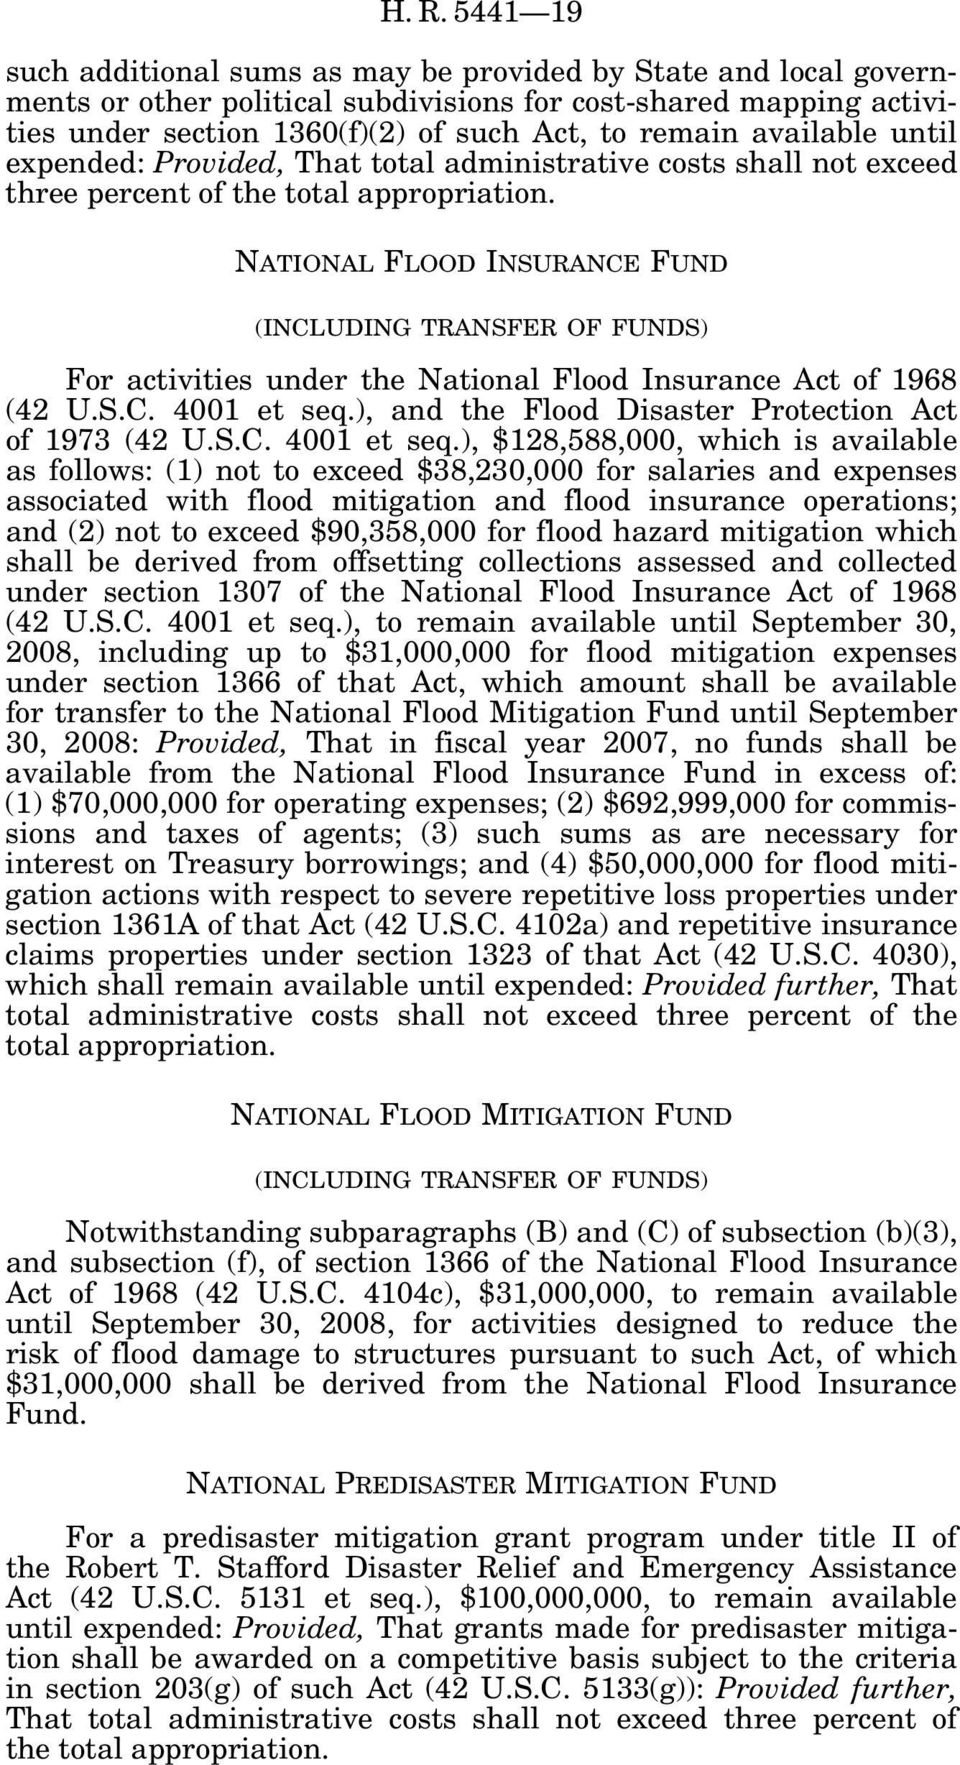 NATIONAL FLOOD INSURANCE FUND (INCLUDING TRANSFER OF FUNDS) For activities under the National Flood Insurance Act of 1968 (42 U.S.C. 4001 et seq.), and the Flood Disaster Protection Act of 1973 (42 U.